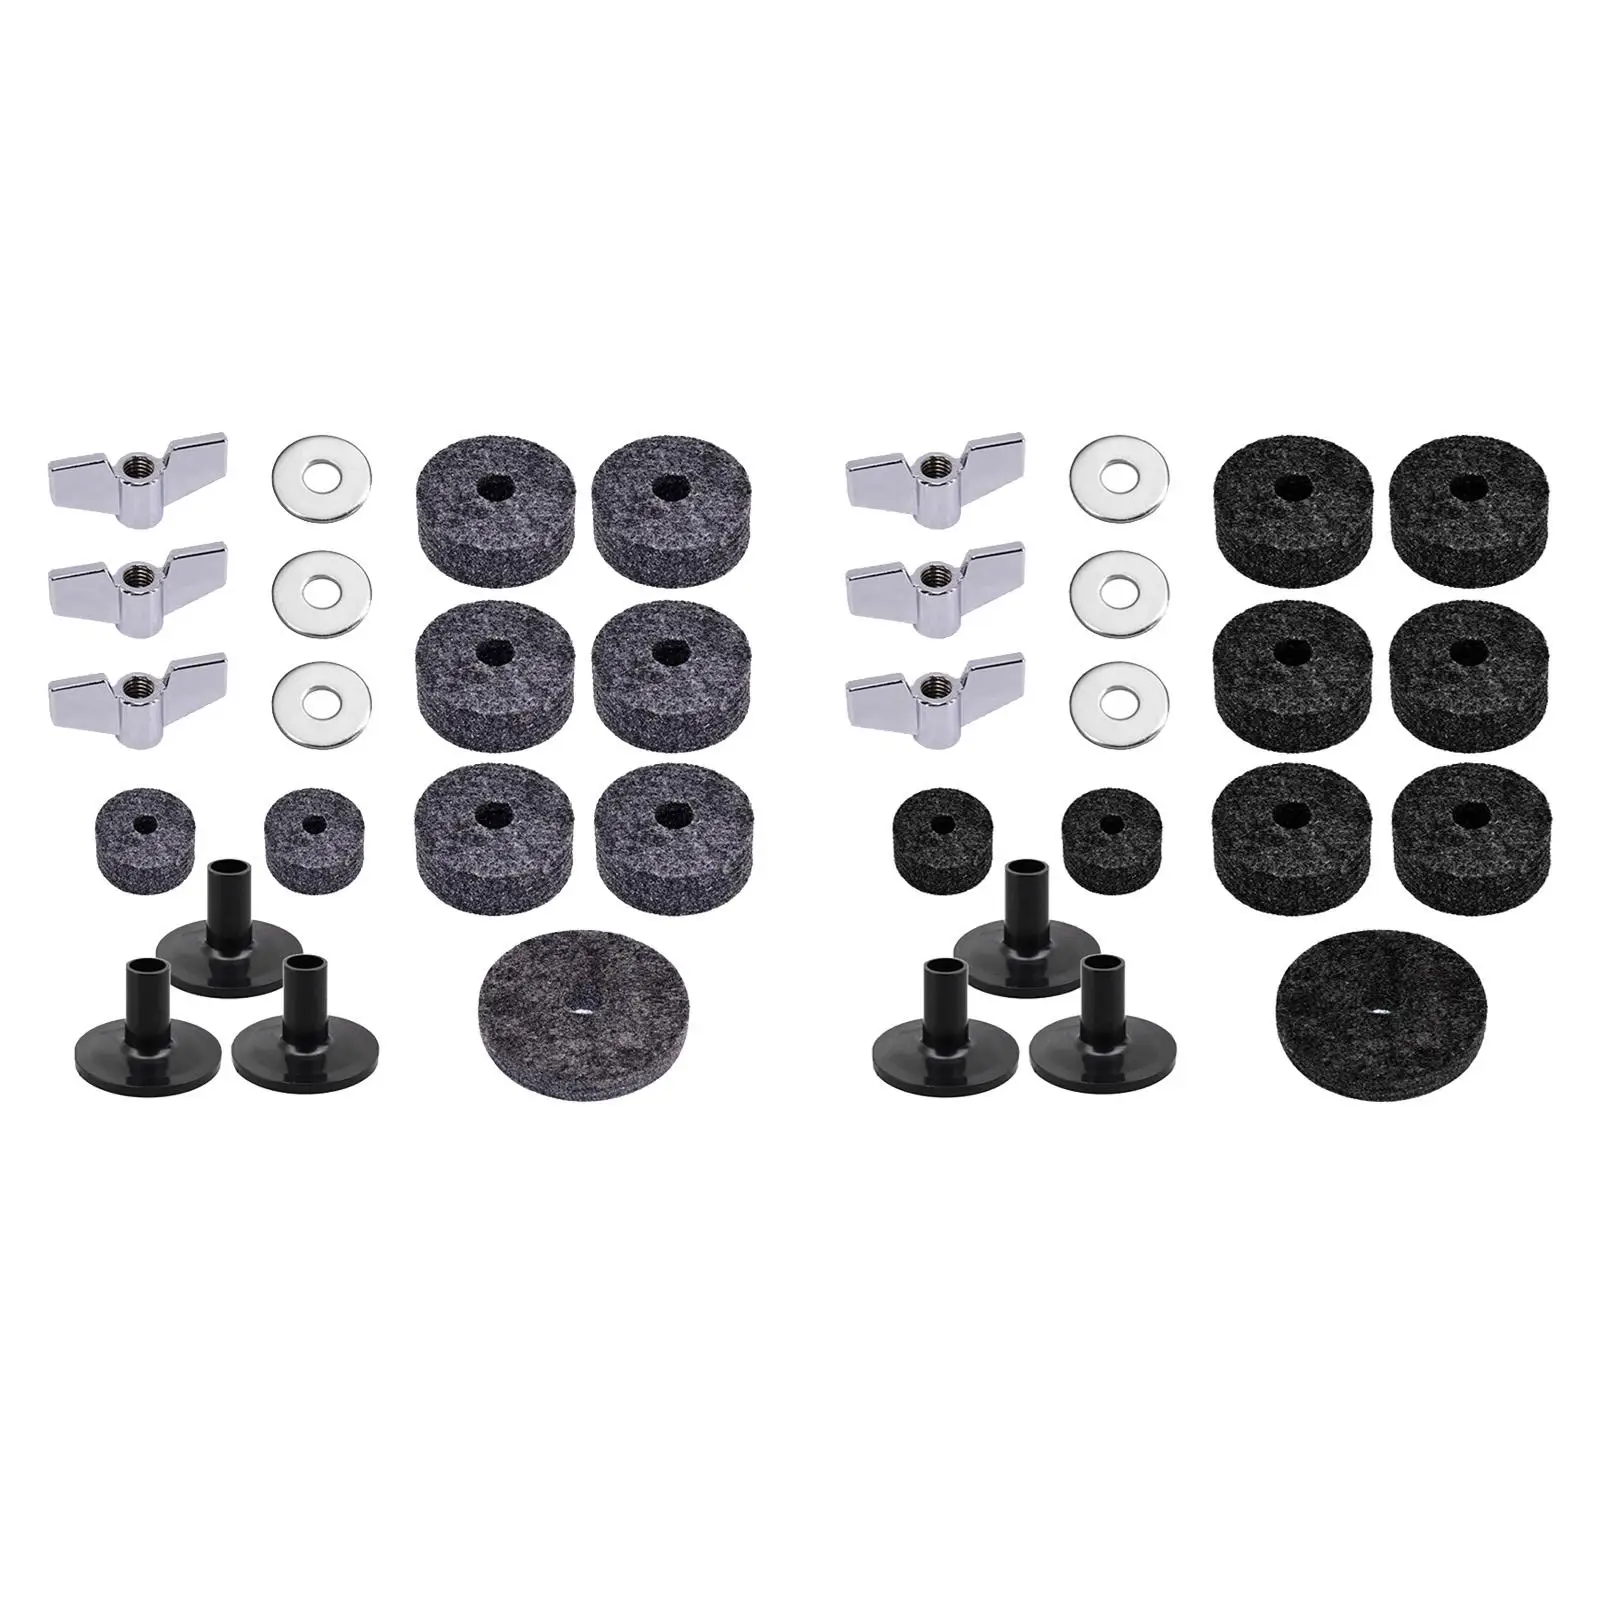 Equipment Cymbal Felts Washers Percussion Instruments, Cymbal Washer, Drum Replacement Parts Accs, for Performer Musician